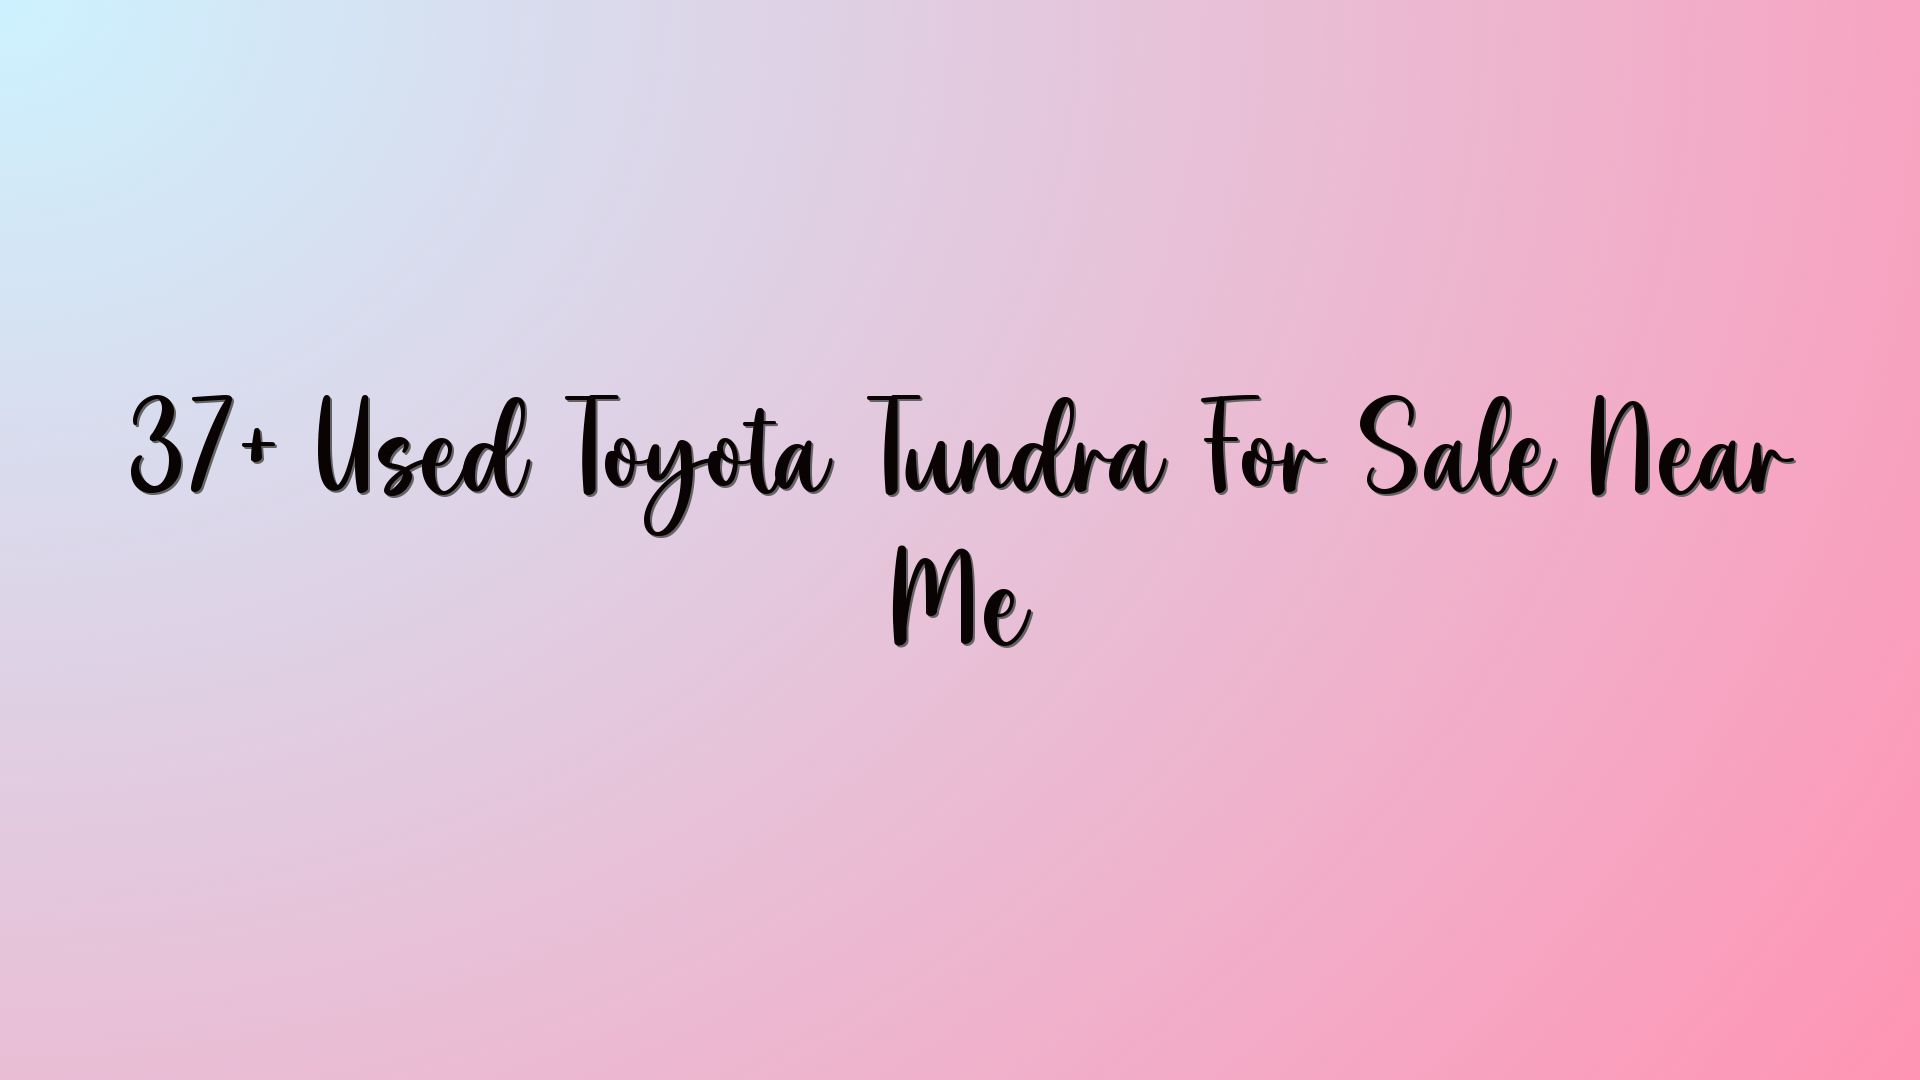 37+ Used Toyota Tundra For Sale Near Me